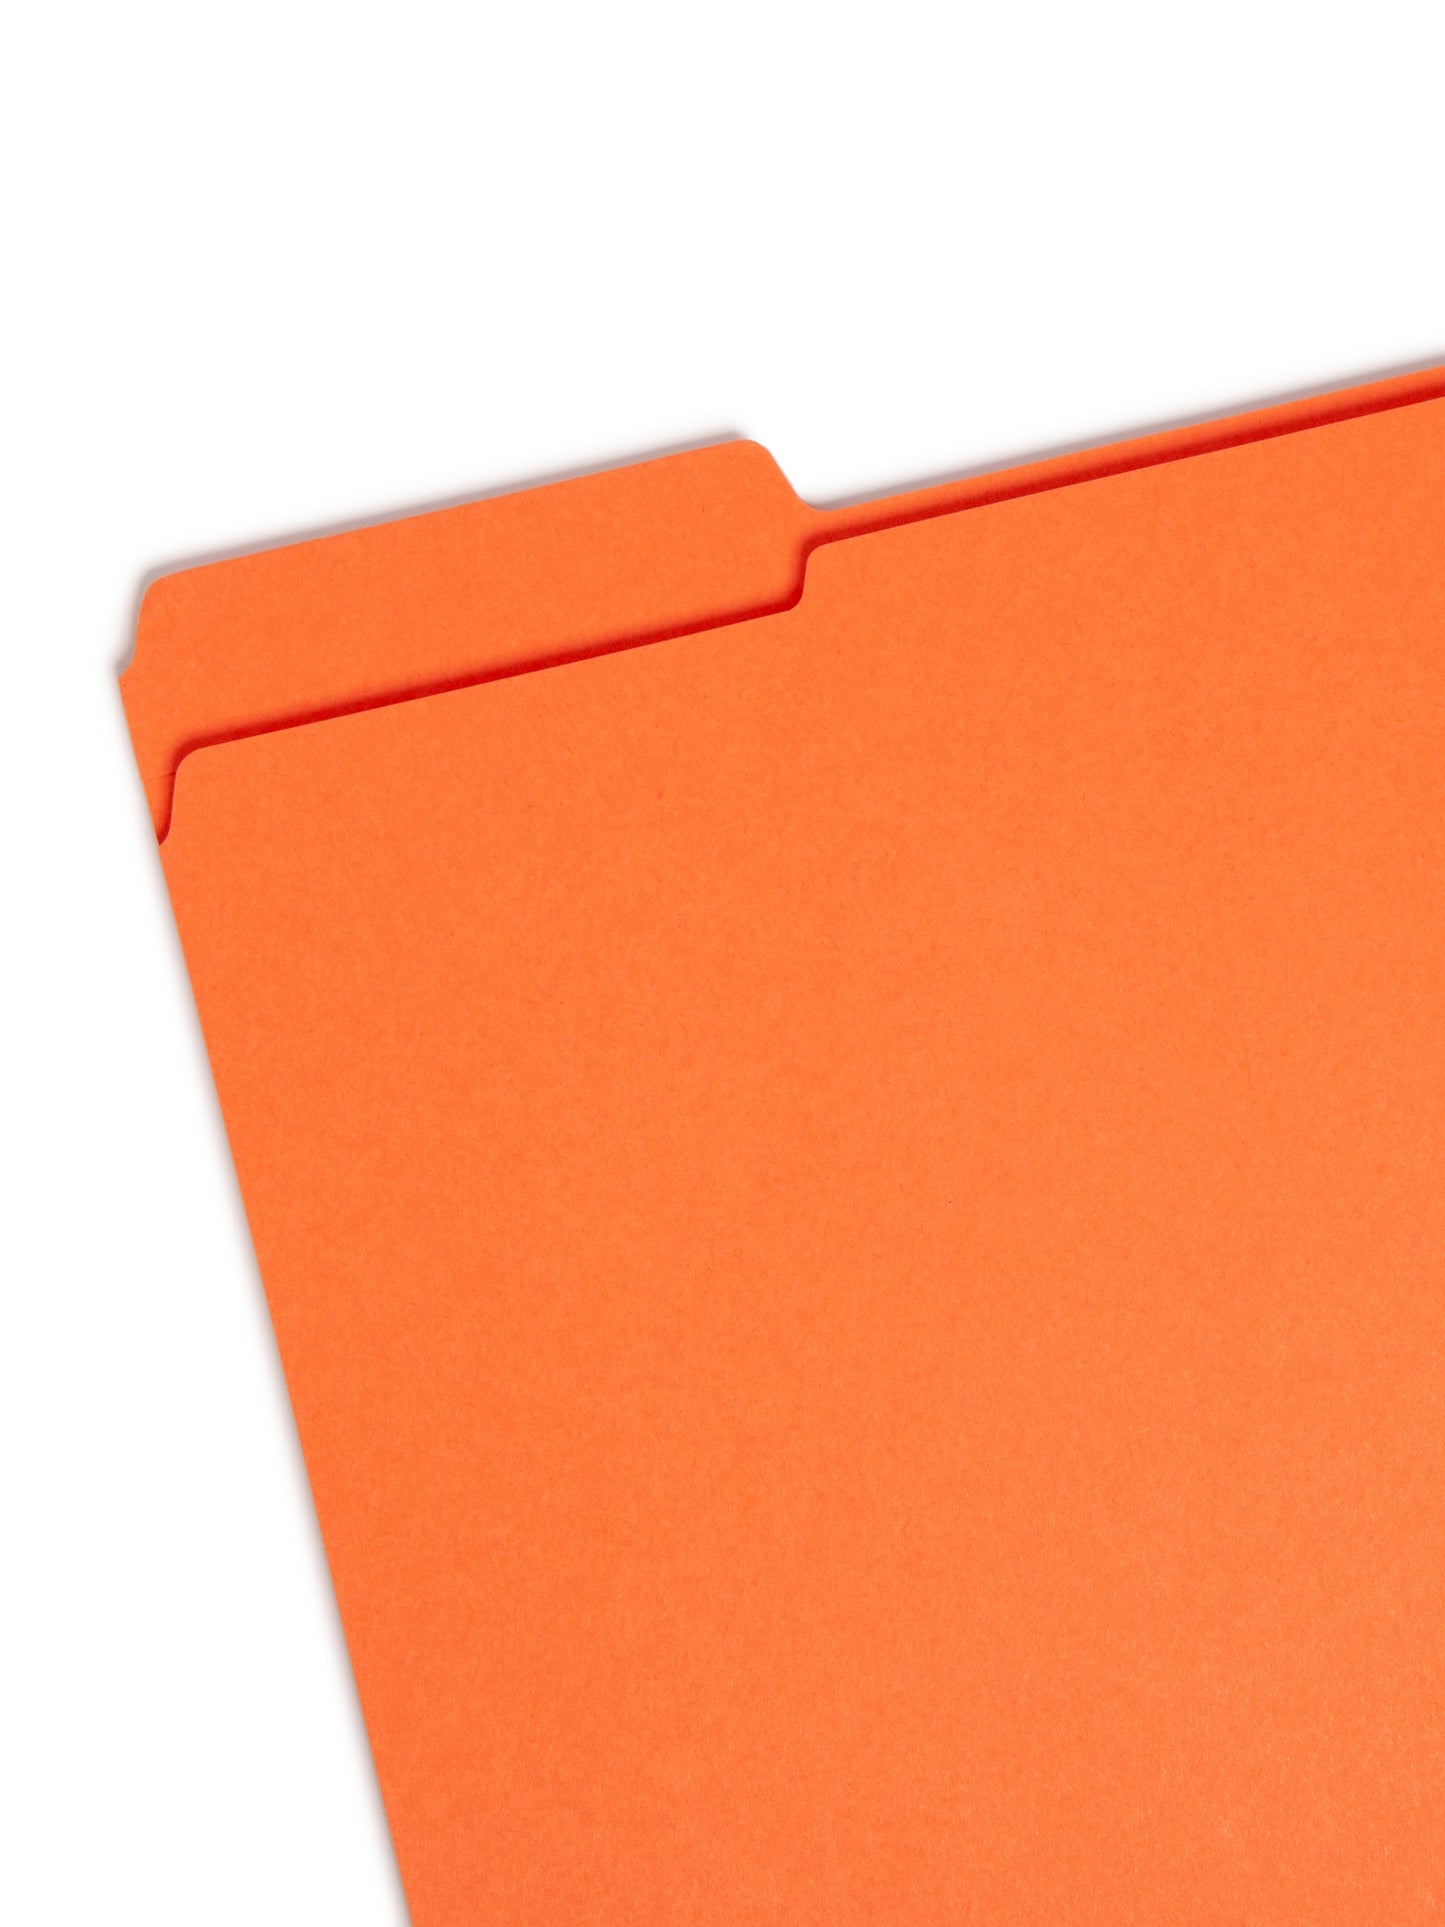 Reinforced Tab File Folders, 1/3-Cut Tab, Assorted Colors Color, Letter Size, Set of 100, 086486119931